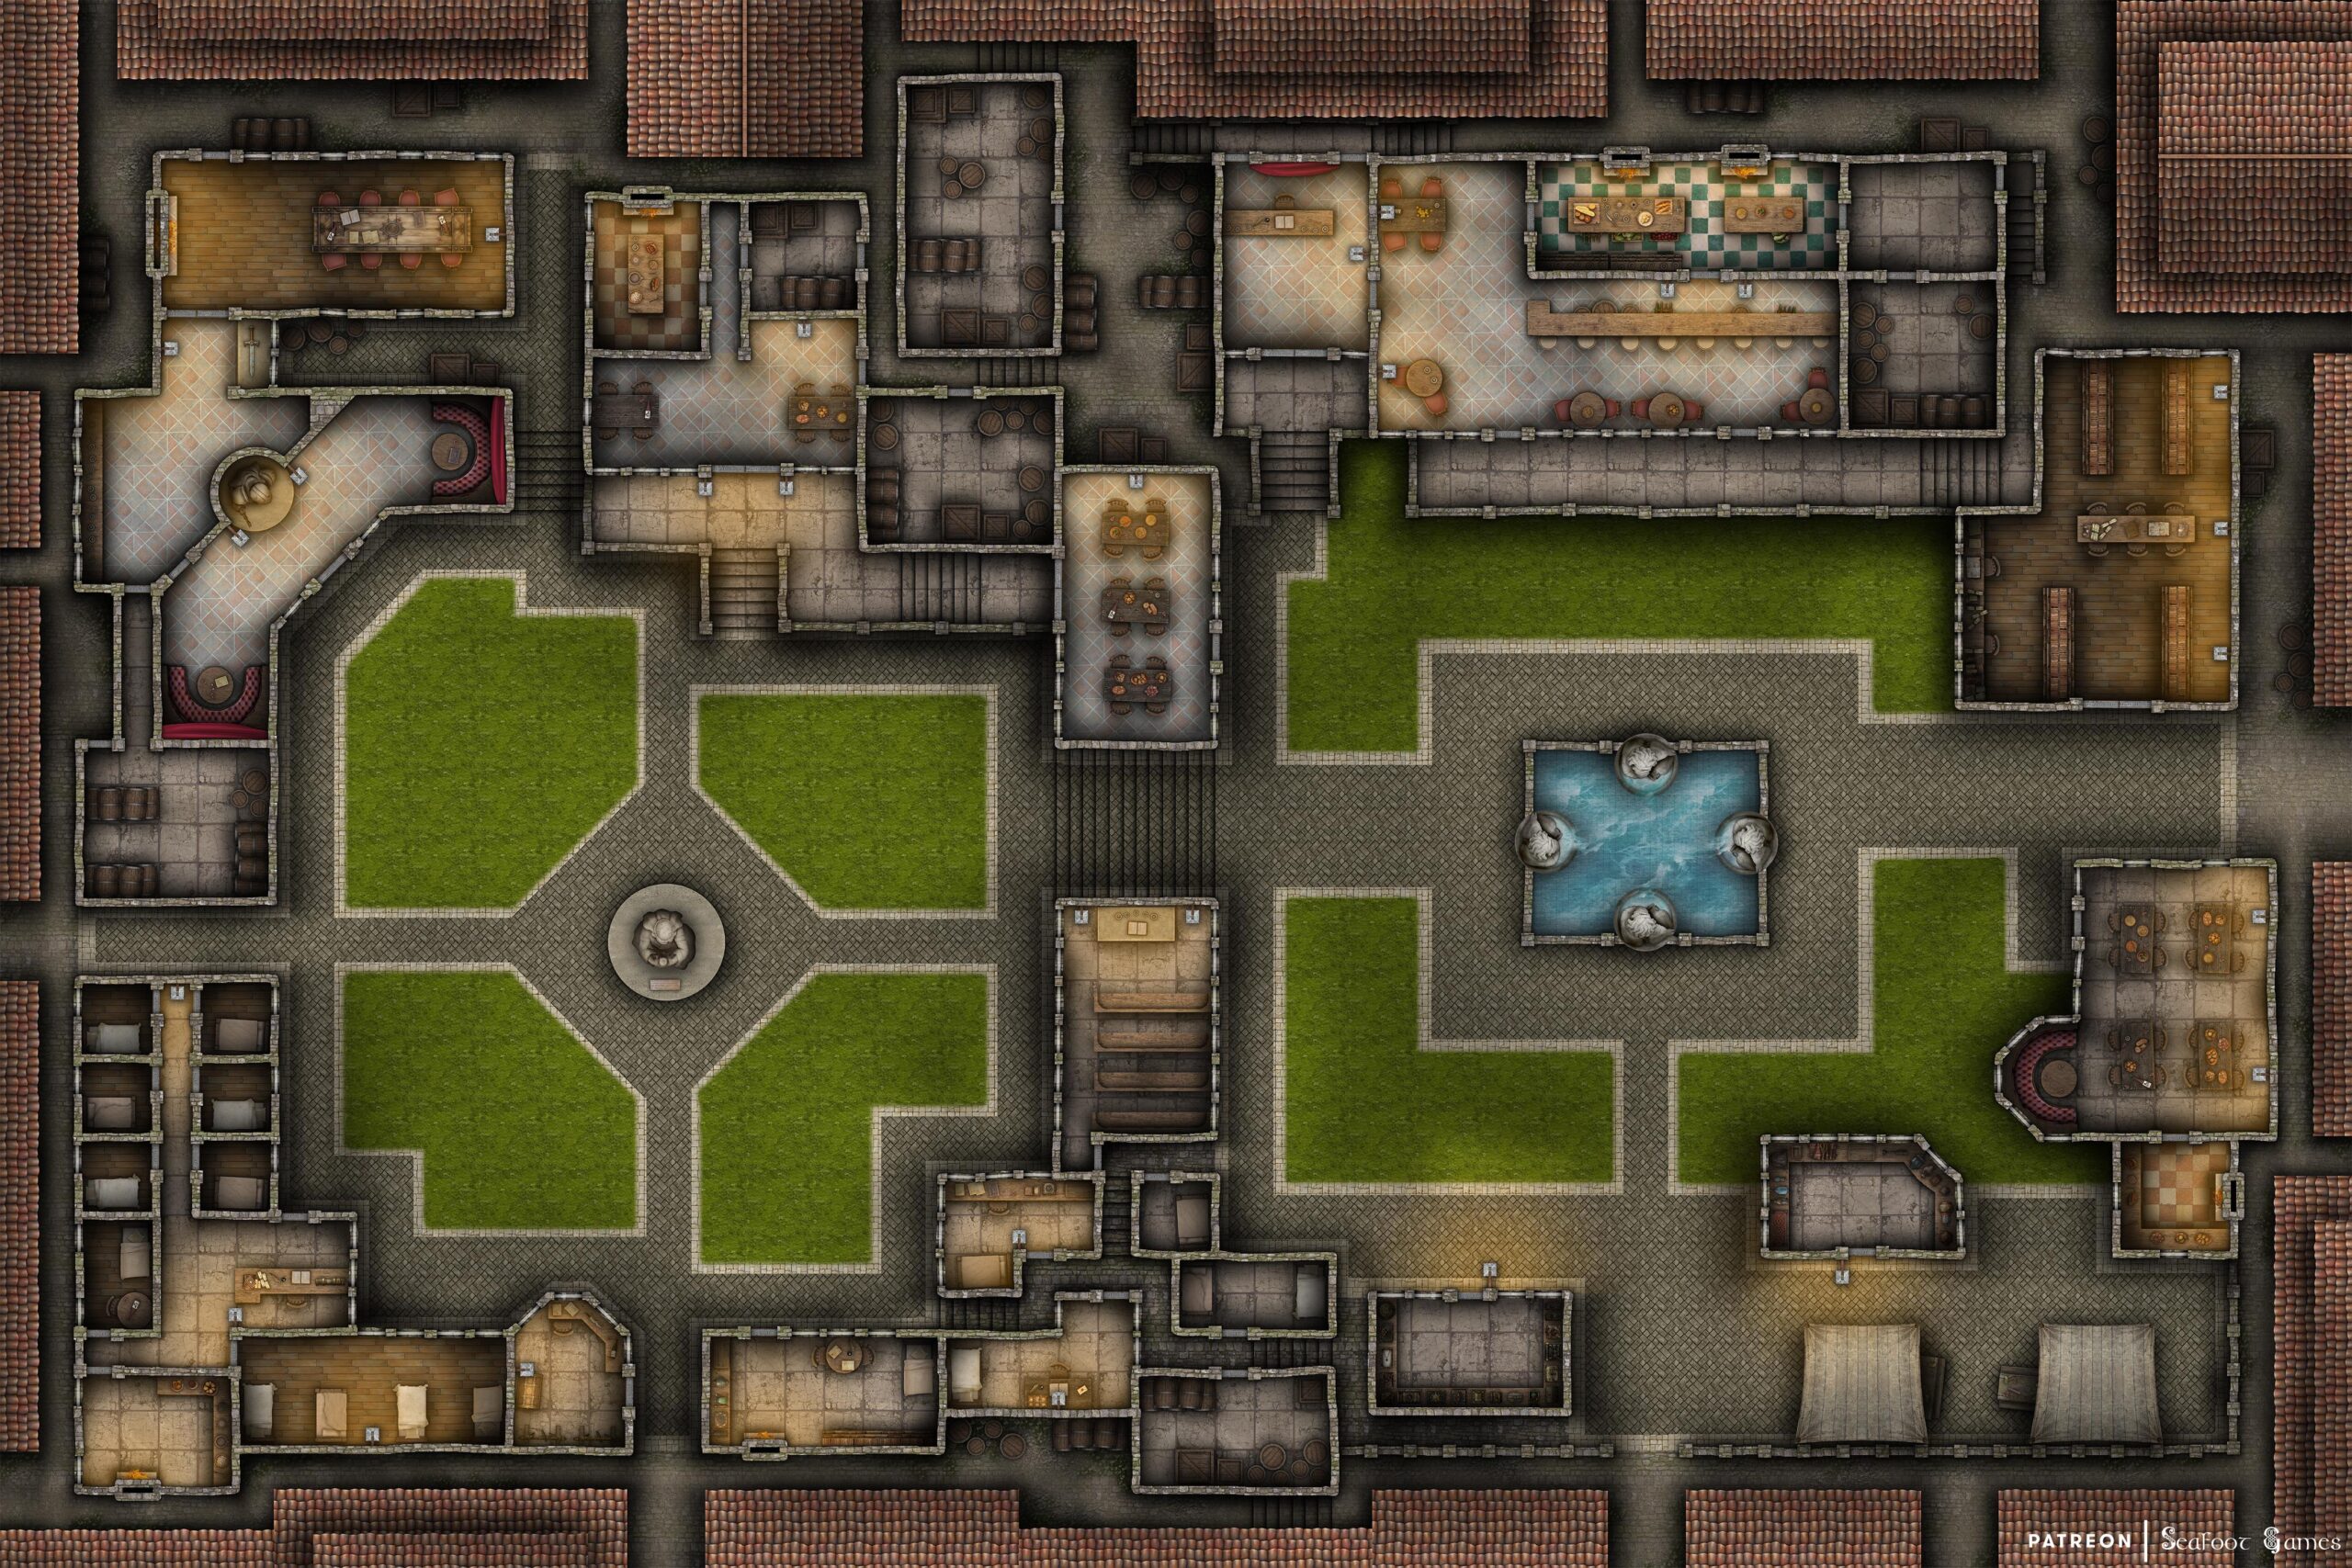 City Plaza Free 60x40 Battlemap, with welcoming houses and taverns opening into green courtyards, one with a fountain. VTT ready!